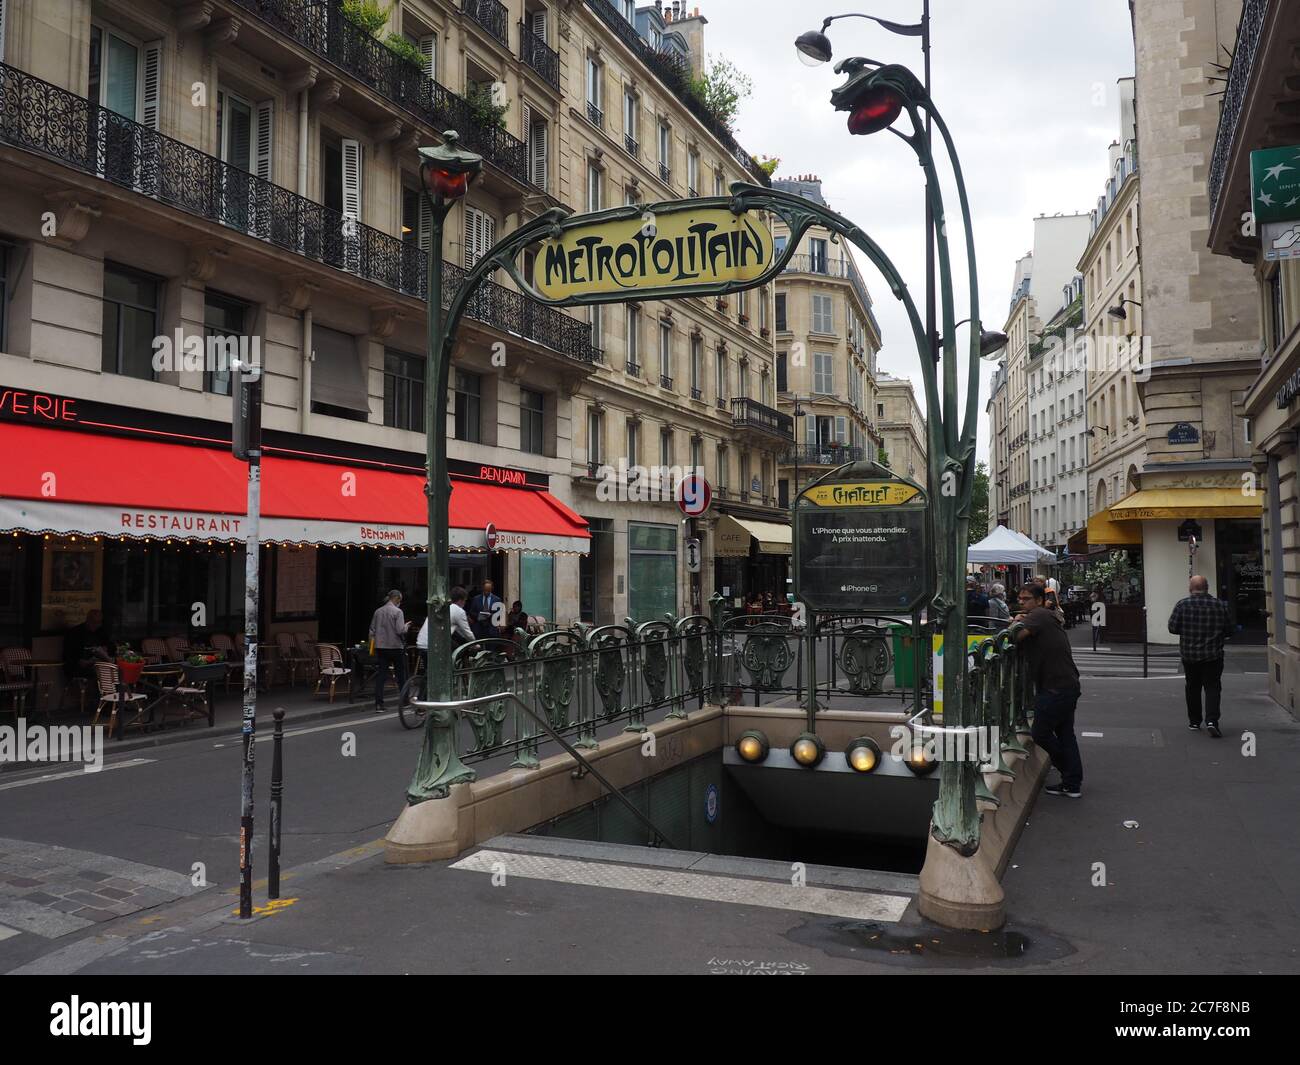 Paris, France. 16th July, 2020. Entrance of the Châtelet Métro station in  Paris. July 19 marks the 120th anniversary of the opening of the first  métro line in Paris between the stations